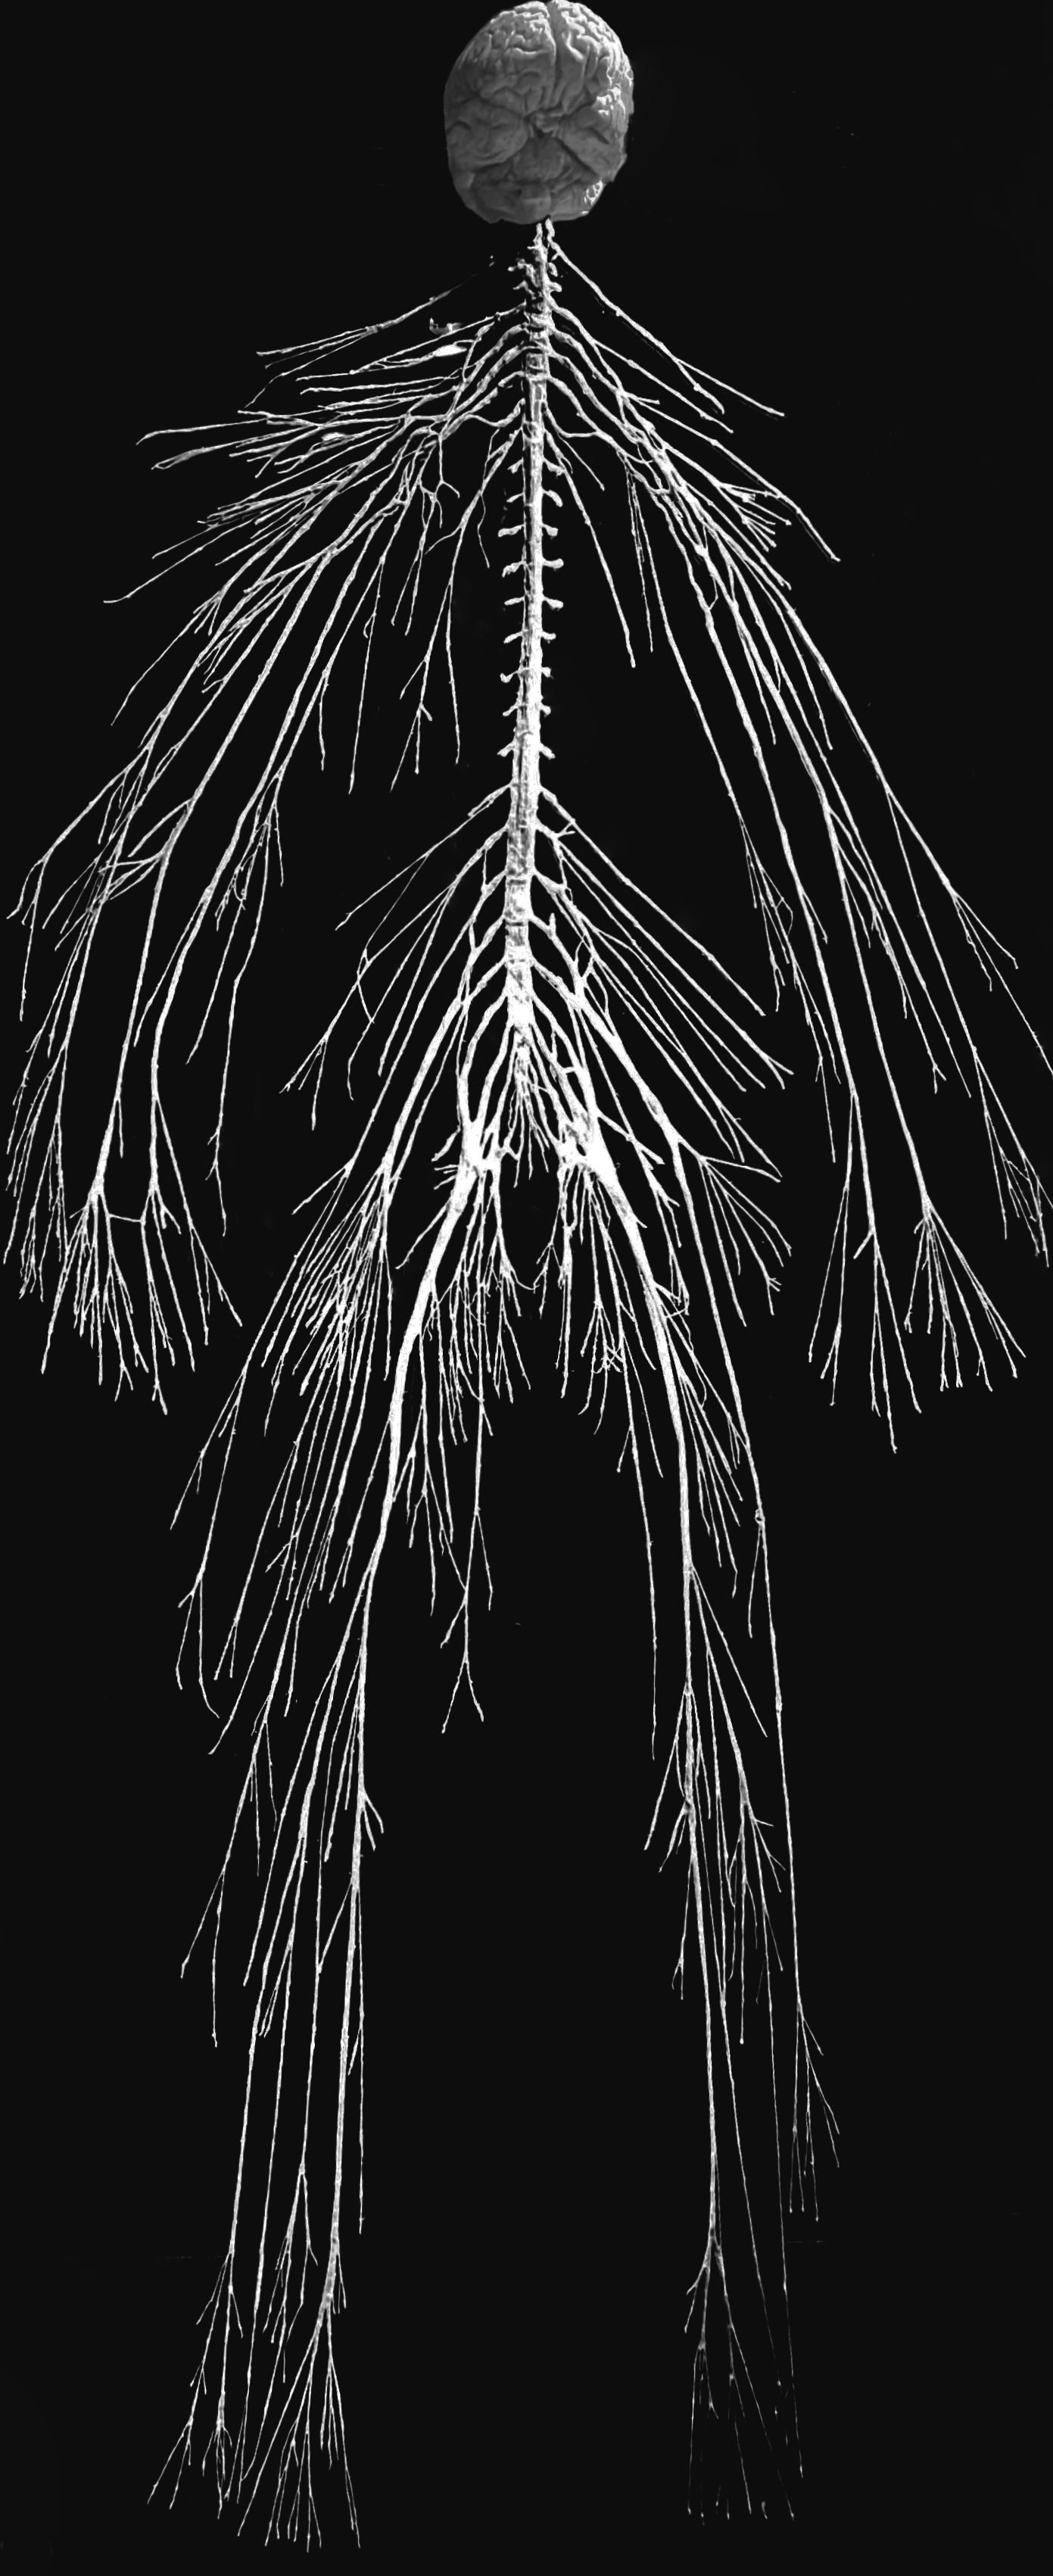 The human nervous system.